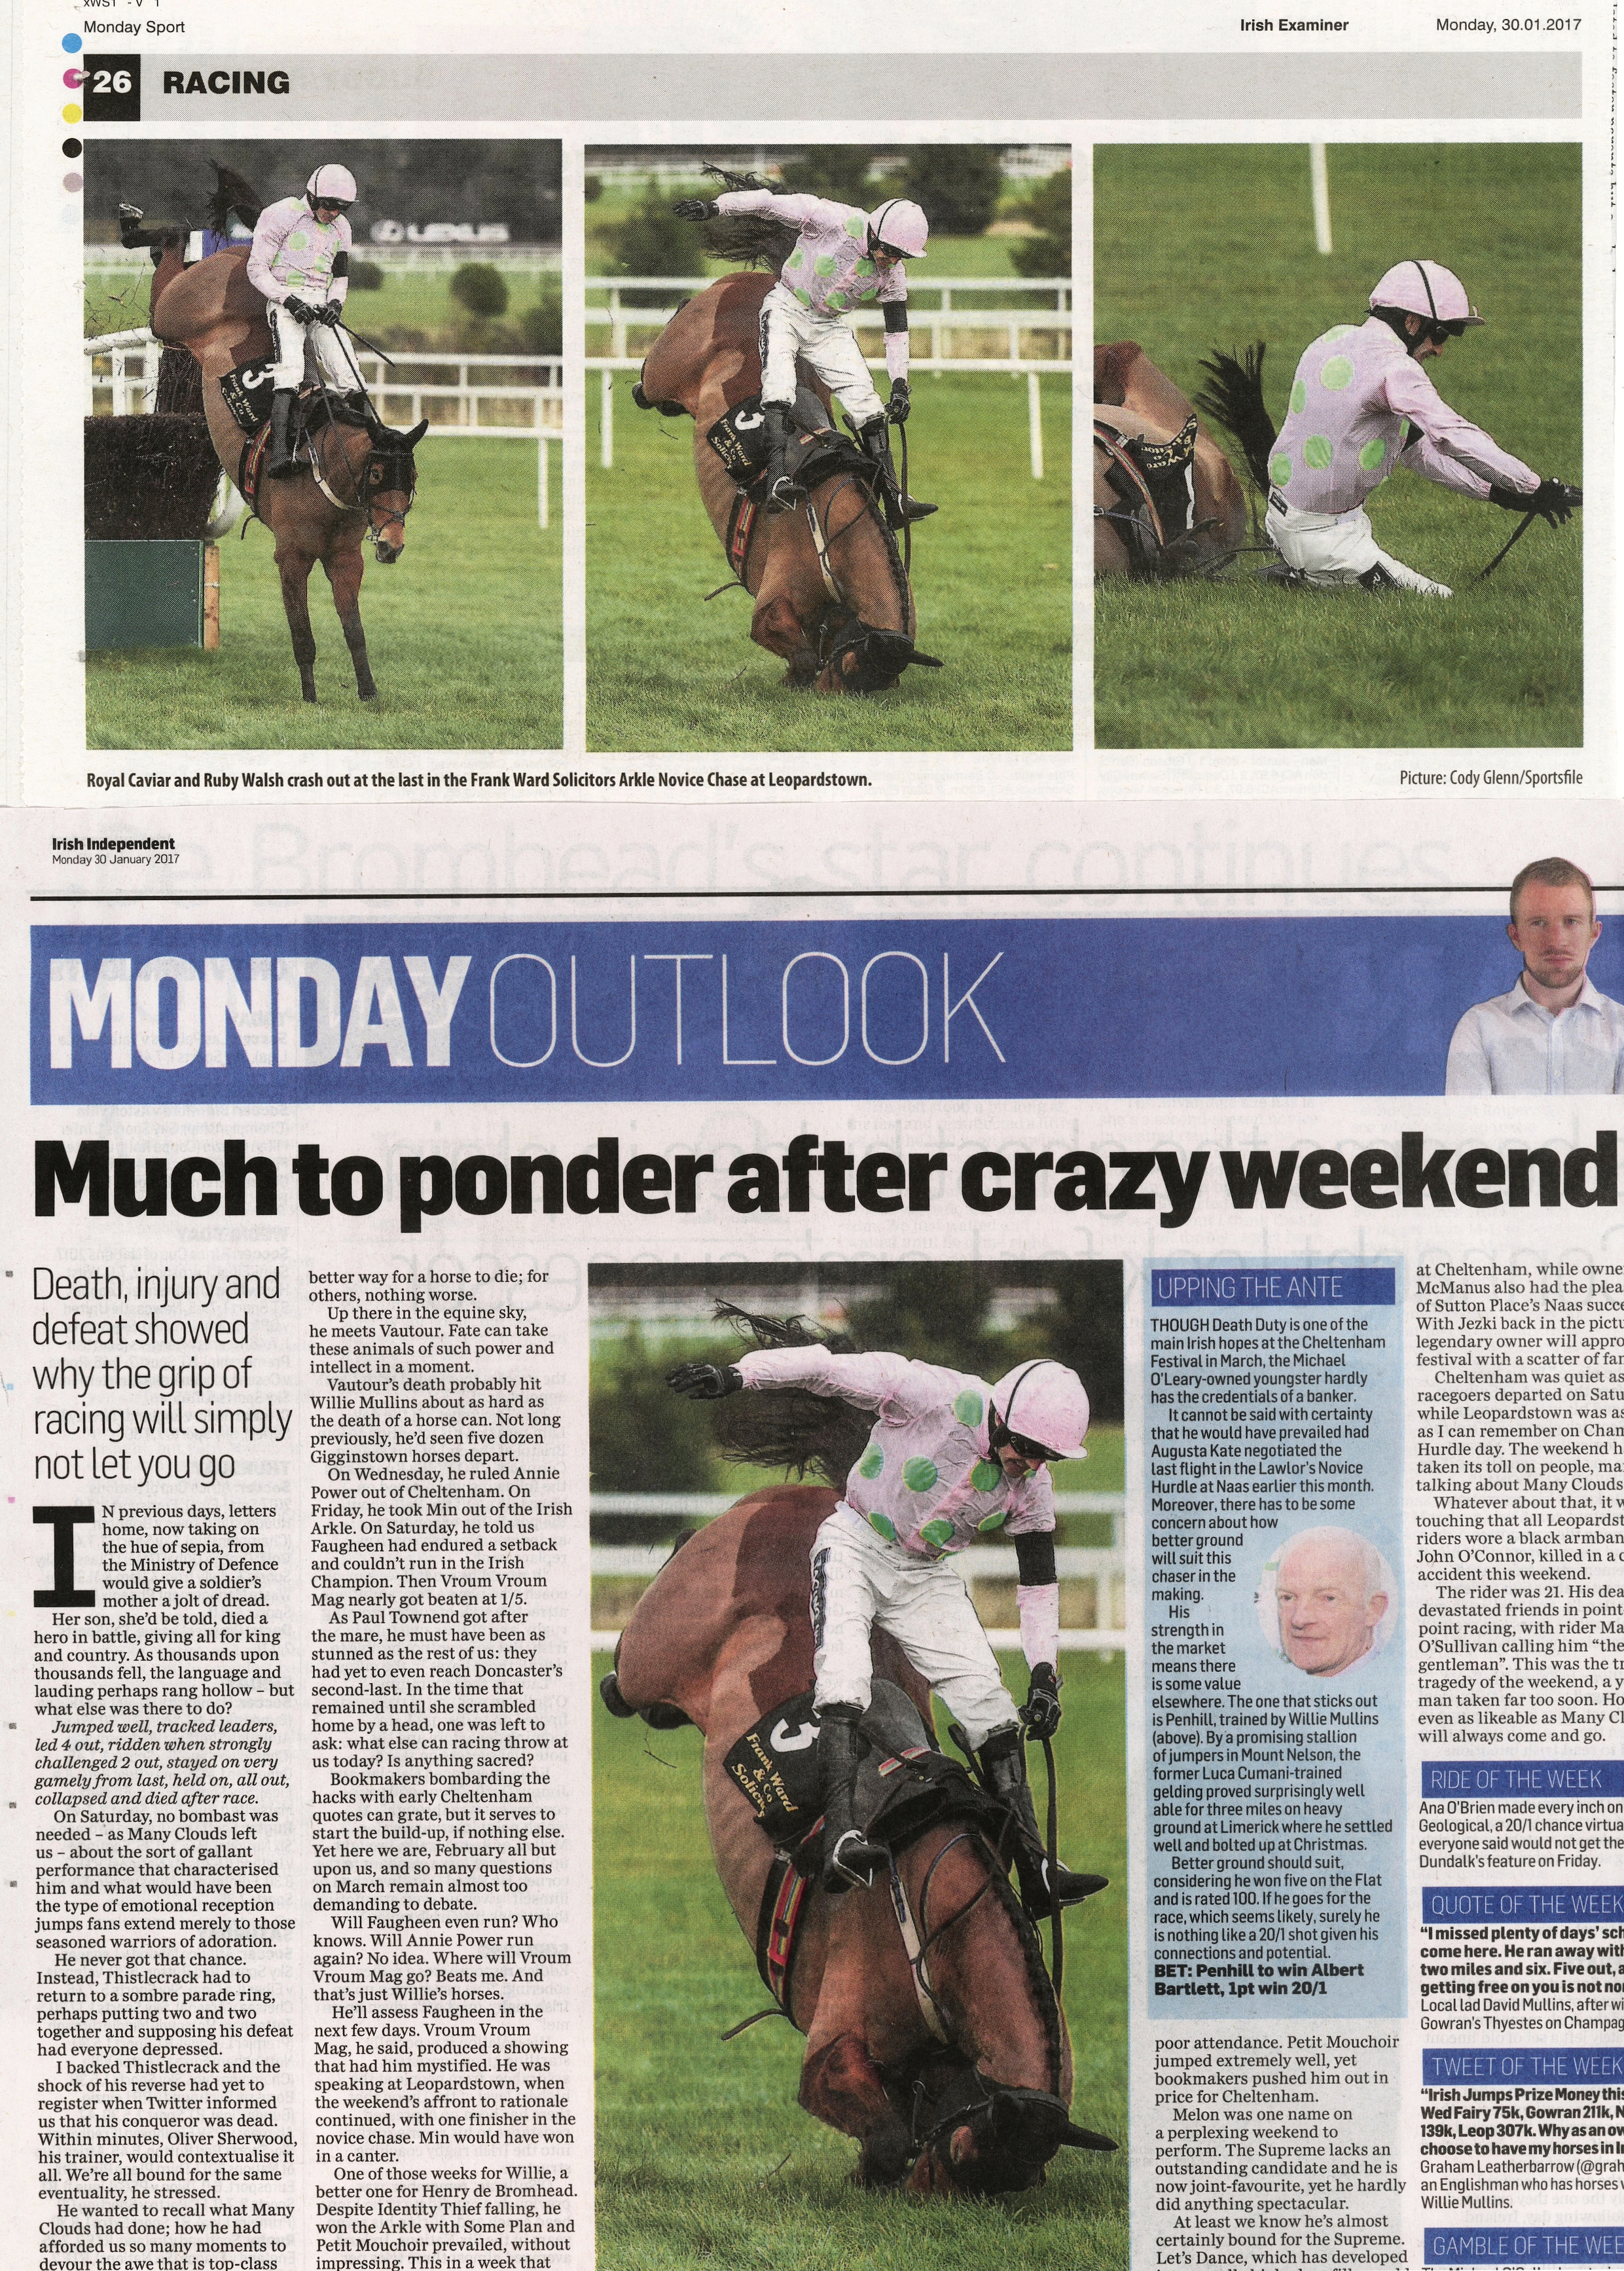  Ruby Walsh parts company with Royal Caviar over the last at Leopardstown January 30 2017  Irish Examiner / Irish Independent  